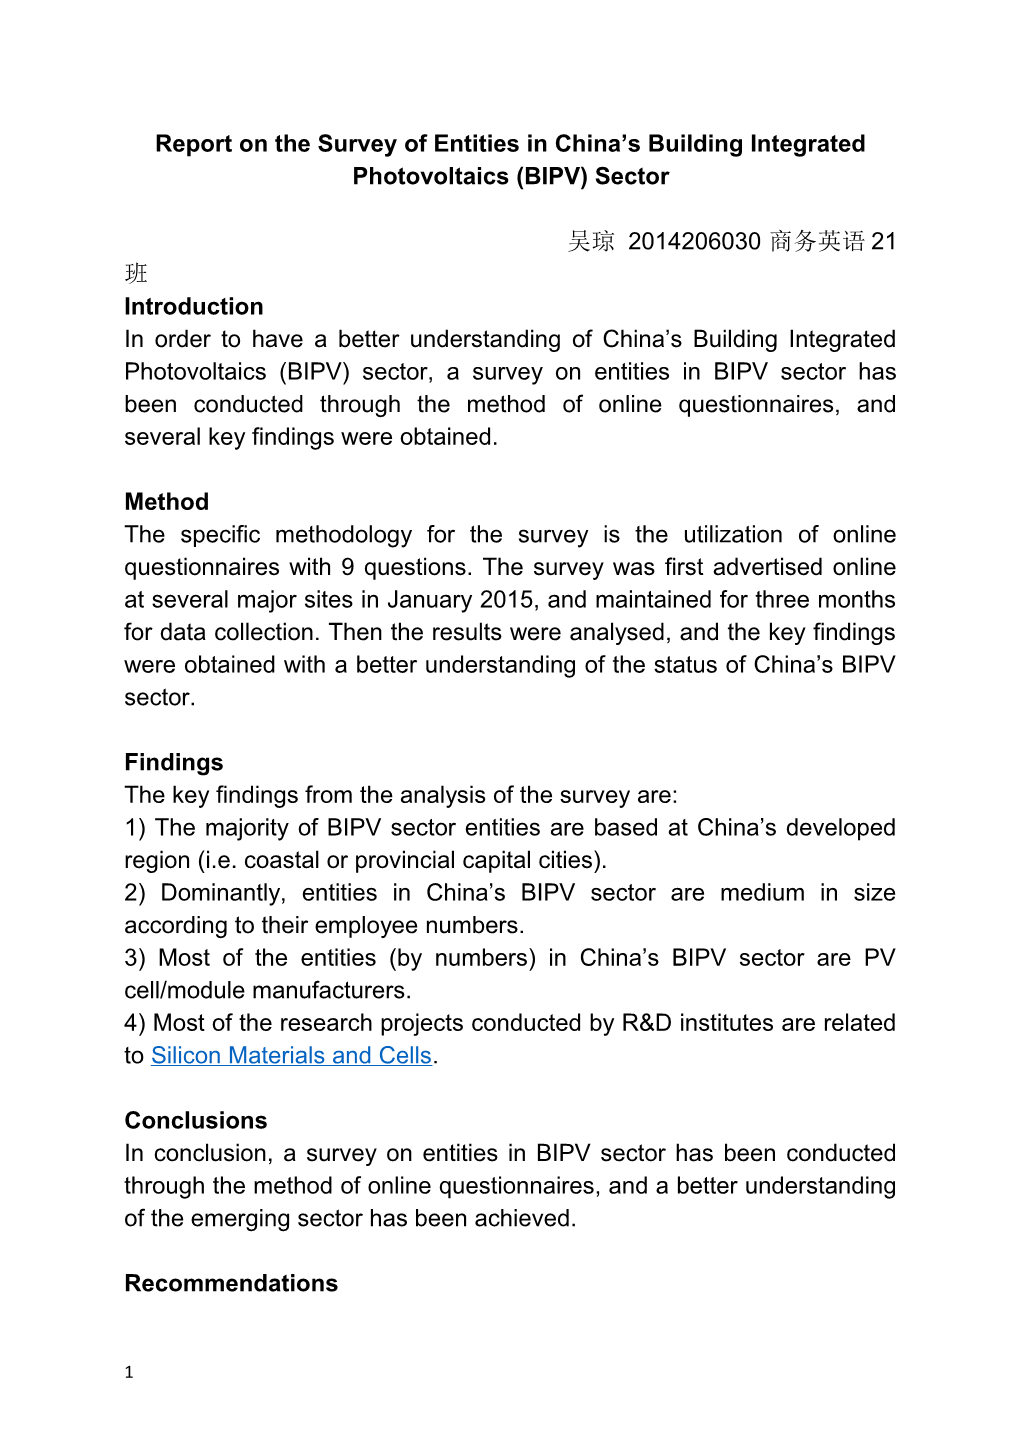 Report on the Survey of Entities in China S Building Integrated Photovoltaics (BIPV) Sector